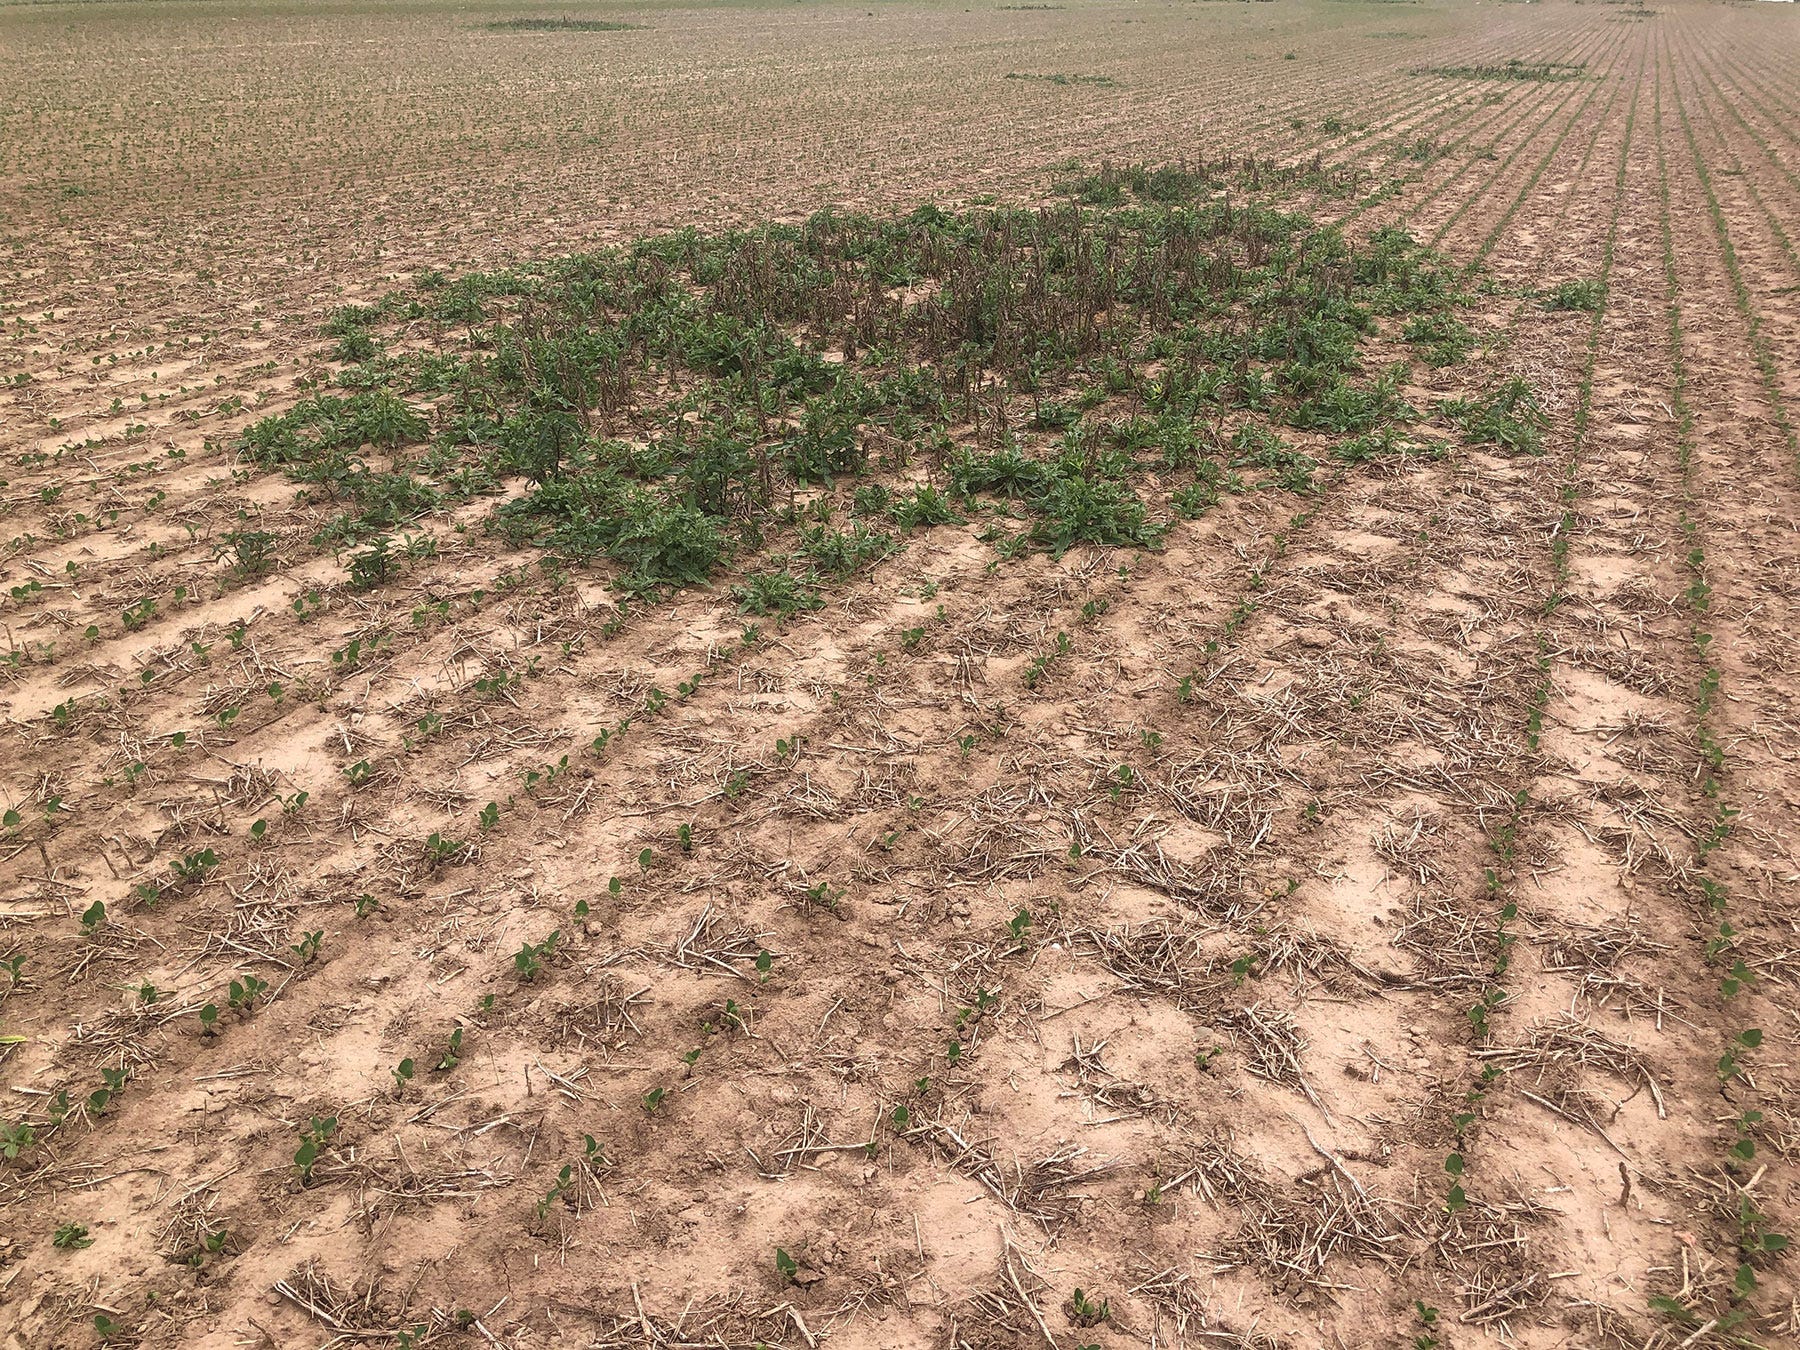 A patch of Cananda thistle in a soybean field with small soybean sprouts